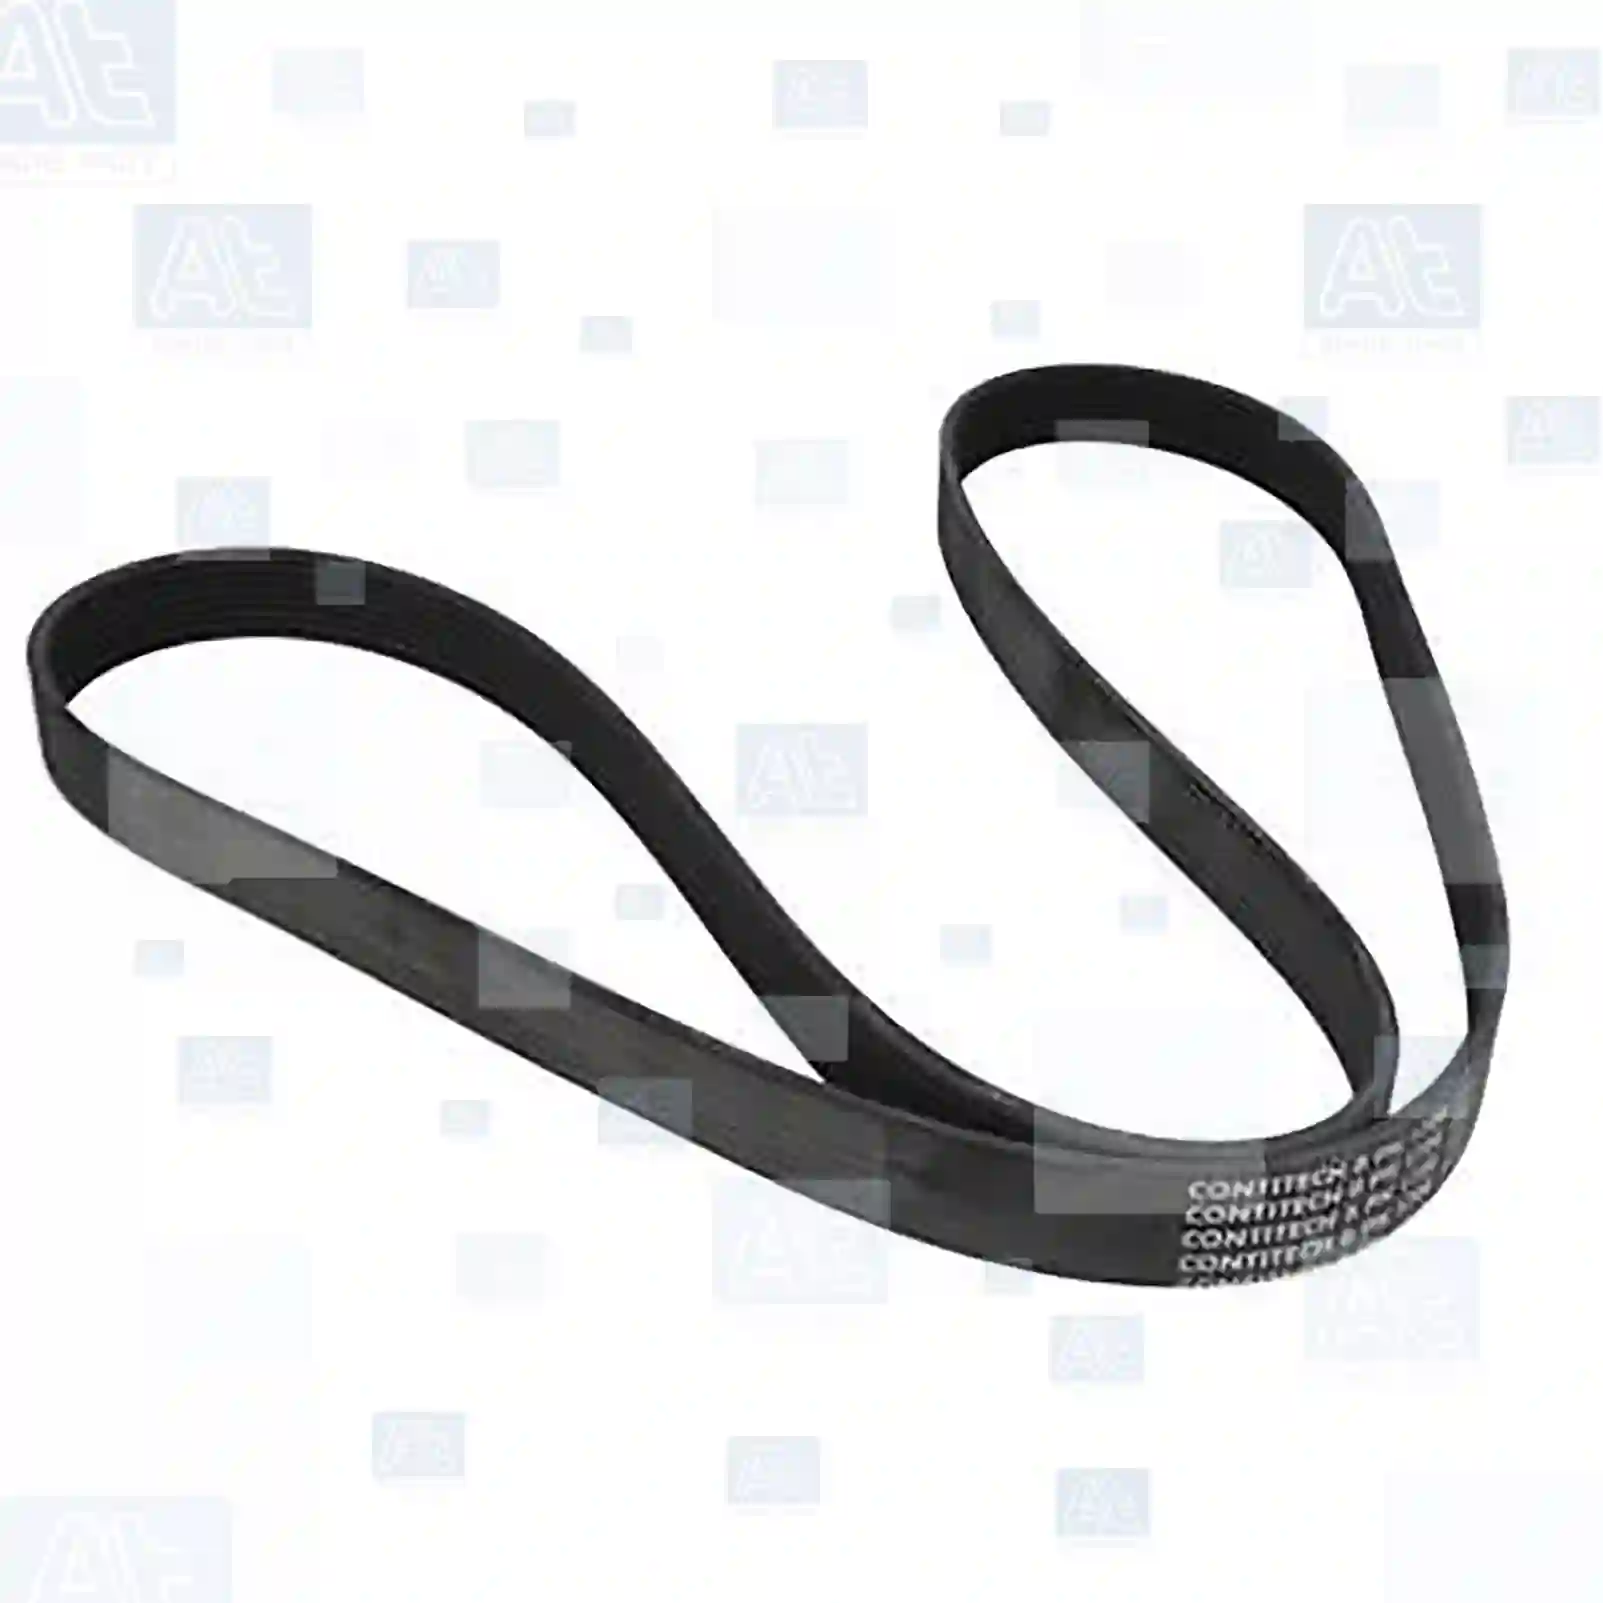 Multiribbed belt, 77708443, 55566903, 55566904, 55566905, 4861722AA, 4861722AB, 4861733AA, 4861733AB, 4861733AC, K04861722AA, K04861722AB, K04861733AA, K04861733AB, 5750YX, 9681752380, 4861722AA, 4861722AB, 4861733AC, 158102, 55202378, 71744462, 71746482, 1682006, 1683960, 6182613, 6198309, 1340600, 55566905, 6340678, 93192781, 97186395, 97385845, 25212-2B020, 8-97186395-0, 8-97385845-0, 25212-04050, 25212-2B020, 90916-02668, 1340008, 1340600, 6340671, 6340678, 5750YX, 9681752380, 5000678543, 5010412143, 90916-02667, 90916-02668, 9146117, 9146844, 9149117 ||  77708443 At Spare Part | Engine, Accelerator Pedal, Camshaft, Connecting Rod, Crankcase, Crankshaft, Cylinder Head, Engine Suspension Mountings, Exhaust Manifold, Exhaust Gas Recirculation, Filter Kits, Flywheel Housing, General Overhaul Kits, Engine, Intake Manifold, Oil Cleaner, Oil Cooler, Oil Filter, Oil Pump, Oil Sump, Piston & Liner, Sensor & Switch, Timing Case, Turbocharger, Cooling System, Belt Tensioner, Coolant Filter, Coolant Pipe, Corrosion Prevention Agent, Drive, Expansion Tank, Fan, Intercooler, Monitors & Gauges, Radiator, Thermostat, V-Belt / Timing belt, Water Pump, Fuel System, Electronical Injector Unit, Feed Pump, Fuel Filter, cpl., Fuel Gauge Sender,  Fuel Line, Fuel Pump, Fuel Tank, Injection Line Kit, Injection Pump, Exhaust System, Clutch & Pedal, Gearbox, Propeller Shaft, Axles, Brake System, Hubs & Wheels, Suspension, Leaf Spring, Universal Parts / Accessories, Steering, Electrical System, Cabin Multiribbed belt, 77708443, 55566903, 55566904, 55566905, 4861722AA, 4861722AB, 4861733AA, 4861733AB, 4861733AC, K04861722AA, K04861722AB, K04861733AA, K04861733AB, 5750YX, 9681752380, 4861722AA, 4861722AB, 4861733AC, 158102, 55202378, 71744462, 71746482, 1682006, 1683960, 6182613, 6198309, 1340600, 55566905, 6340678, 93192781, 97186395, 97385845, 25212-2B020, 8-97186395-0, 8-97385845-0, 25212-04050, 25212-2B020, 90916-02668, 1340008, 1340600, 6340671, 6340678, 5750YX, 9681752380, 5000678543, 5010412143, 90916-02667, 90916-02668, 9146117, 9146844, 9149117 ||  77708443 At Spare Part | Engine, Accelerator Pedal, Camshaft, Connecting Rod, Crankcase, Crankshaft, Cylinder Head, Engine Suspension Mountings, Exhaust Manifold, Exhaust Gas Recirculation, Filter Kits, Flywheel Housing, General Overhaul Kits, Engine, Intake Manifold, Oil Cleaner, Oil Cooler, Oil Filter, Oil Pump, Oil Sump, Piston & Liner, Sensor & Switch, Timing Case, Turbocharger, Cooling System, Belt Tensioner, Coolant Filter, Coolant Pipe, Corrosion Prevention Agent, Drive, Expansion Tank, Fan, Intercooler, Monitors & Gauges, Radiator, Thermostat, V-Belt / Timing belt, Water Pump, Fuel System, Electronical Injector Unit, Feed Pump, Fuel Filter, cpl., Fuel Gauge Sender,  Fuel Line, Fuel Pump, Fuel Tank, Injection Line Kit, Injection Pump, Exhaust System, Clutch & Pedal, Gearbox, Propeller Shaft, Axles, Brake System, Hubs & Wheels, Suspension, Leaf Spring, Universal Parts / Accessories, Steering, Electrical System, Cabin